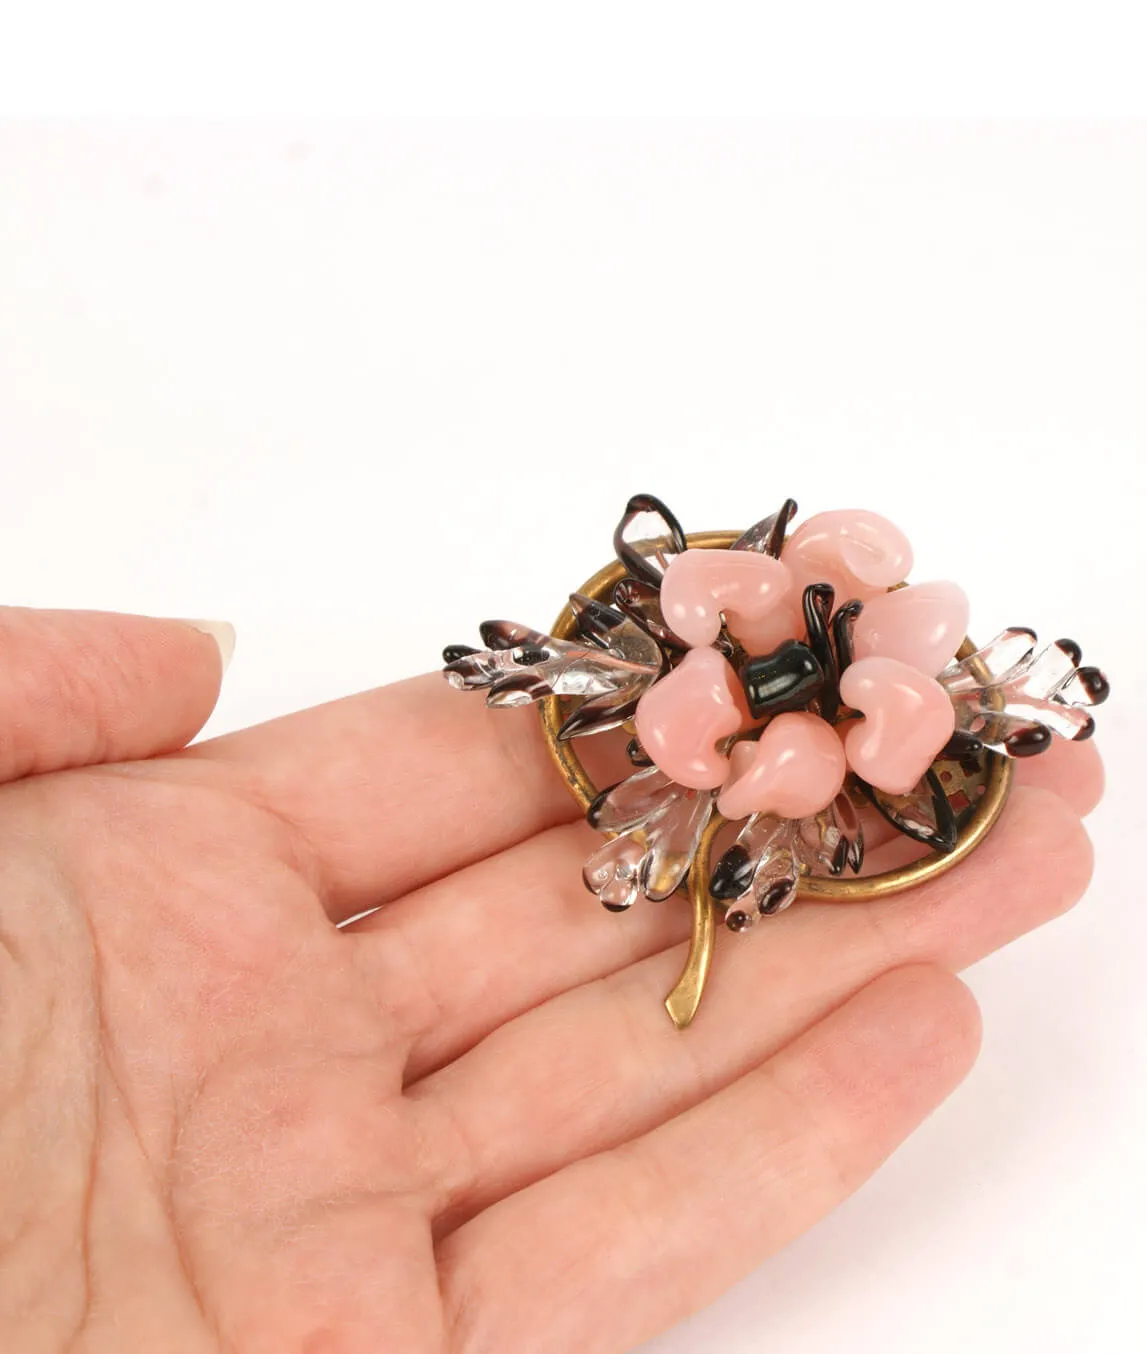 Rousselet brooch in the hand